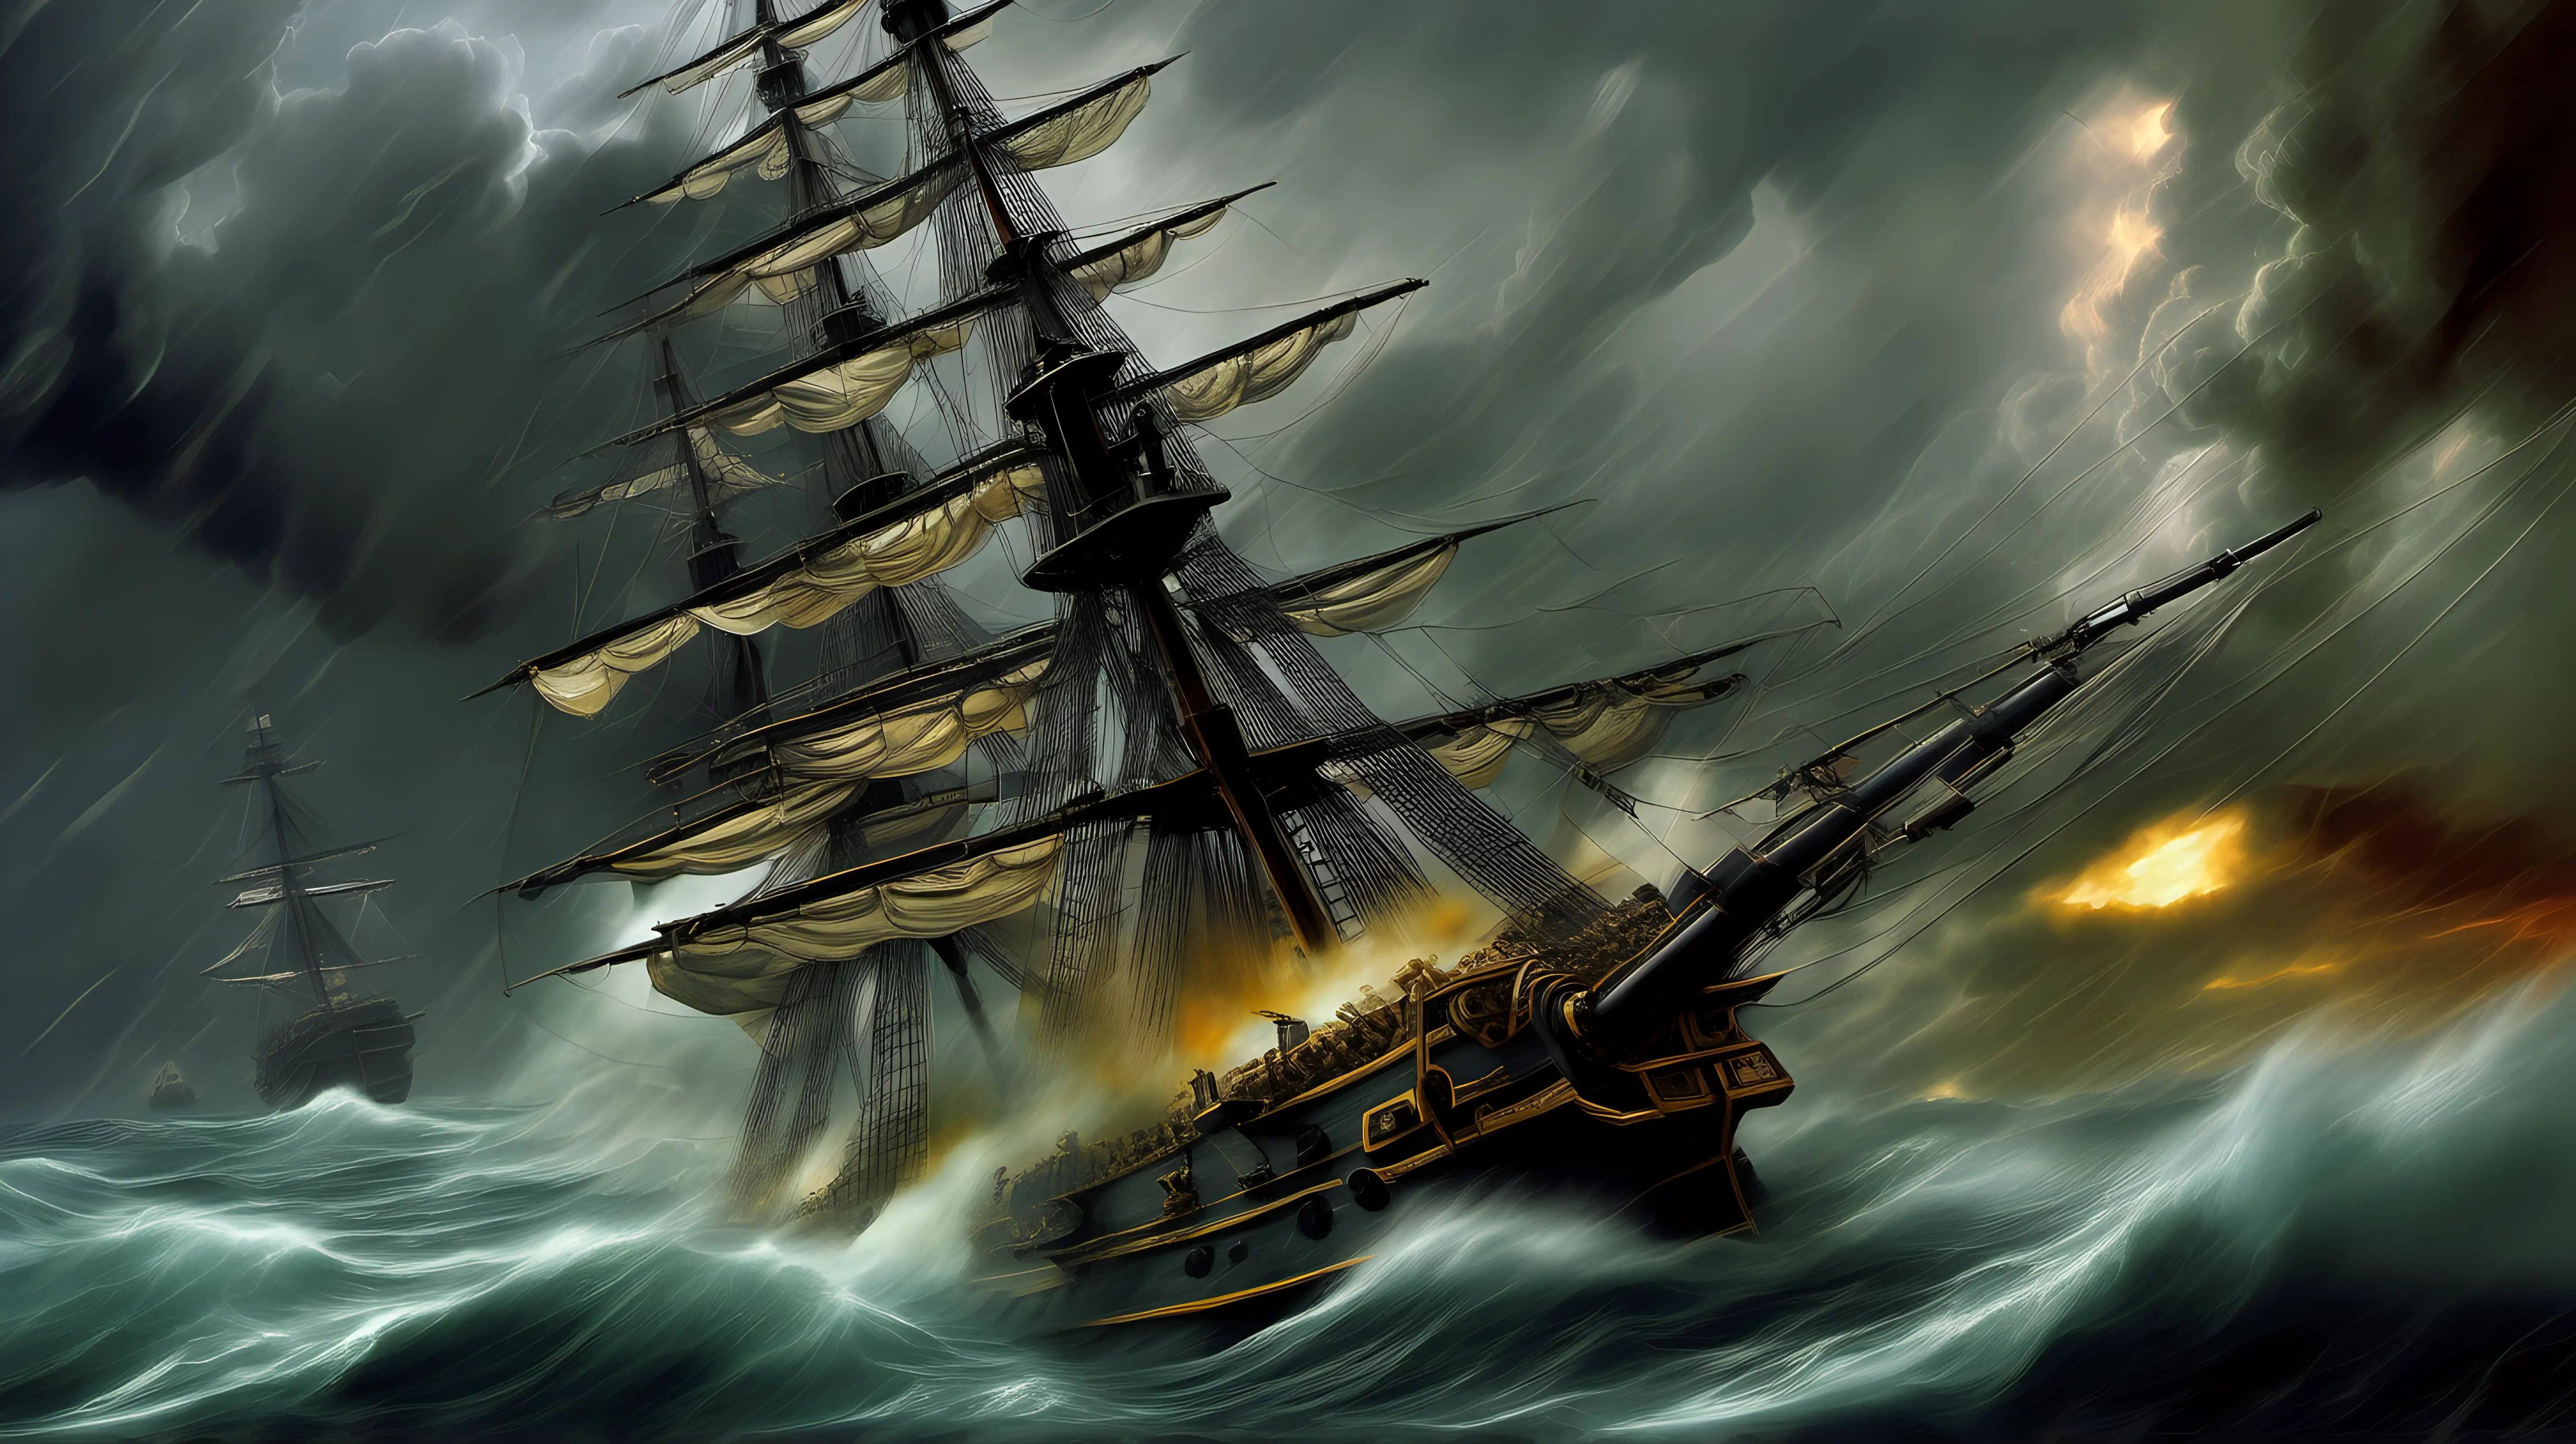 oil painting style of a 1700 square rig battle ship, firing cannons, storm